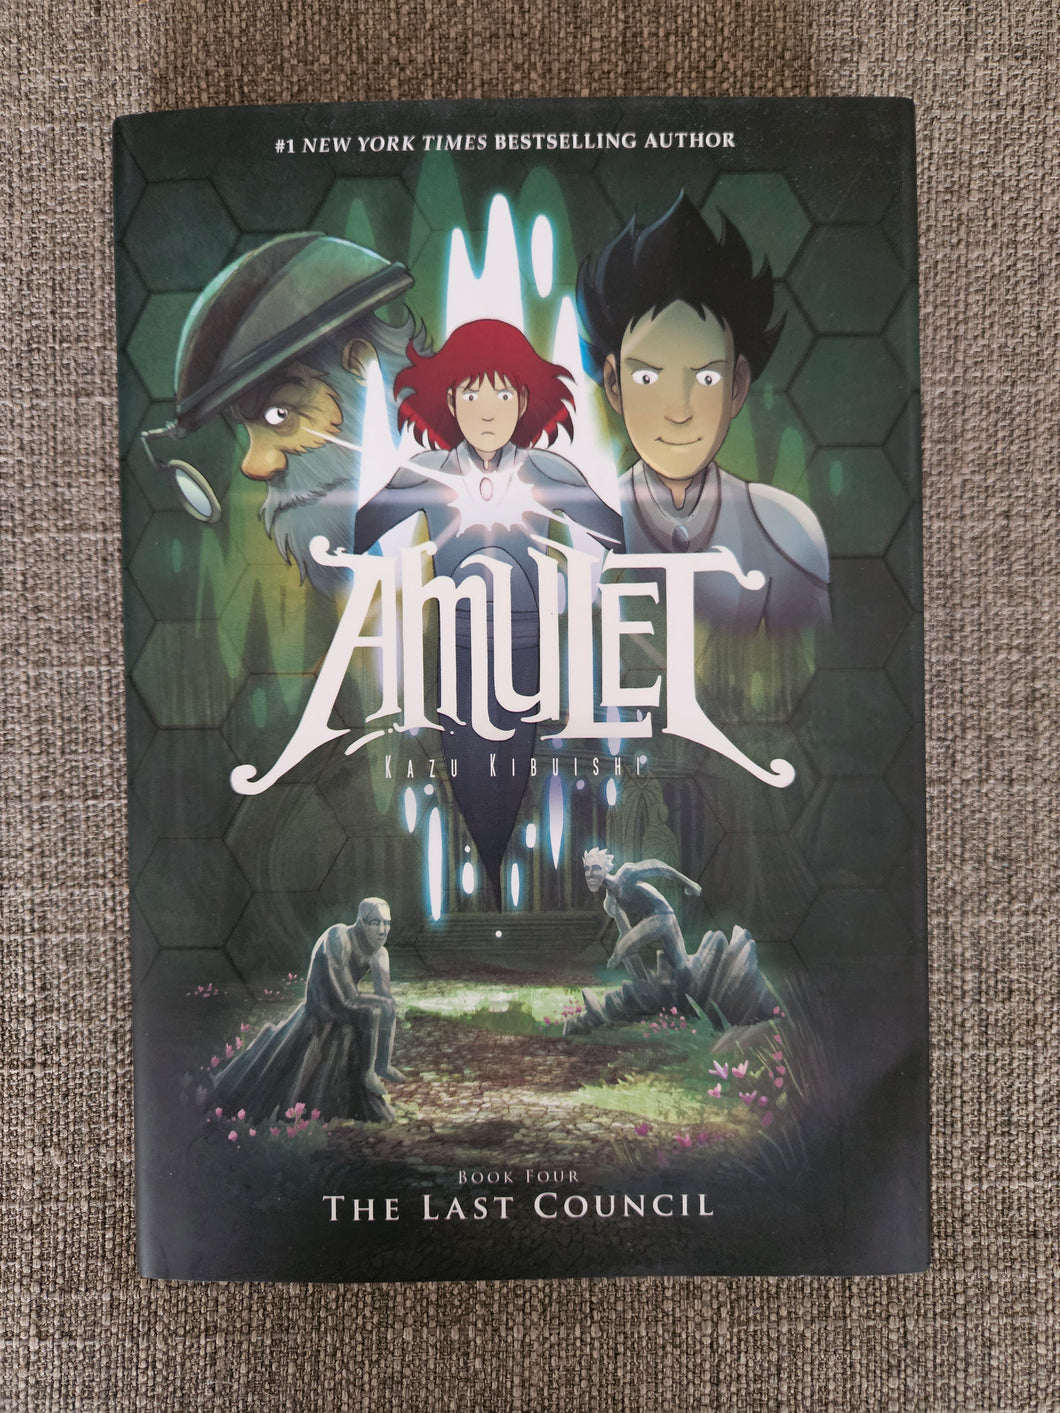 Amulet book 4, New hardcover